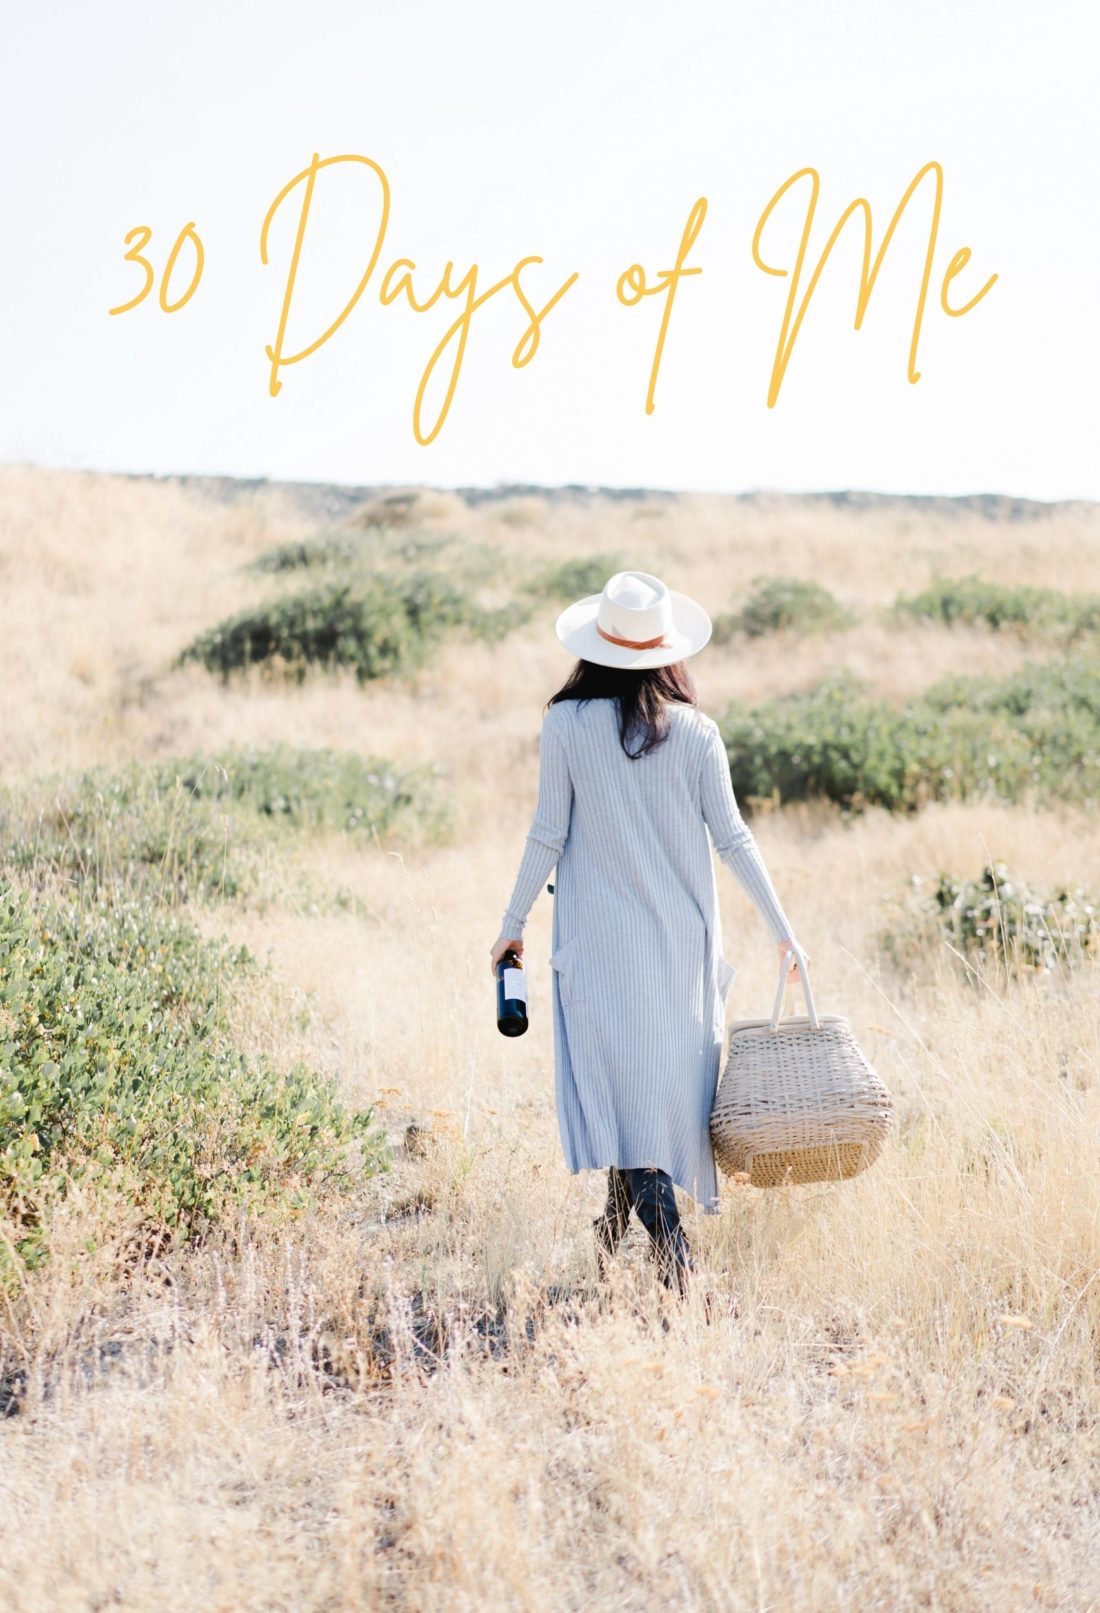 30 Days of Me